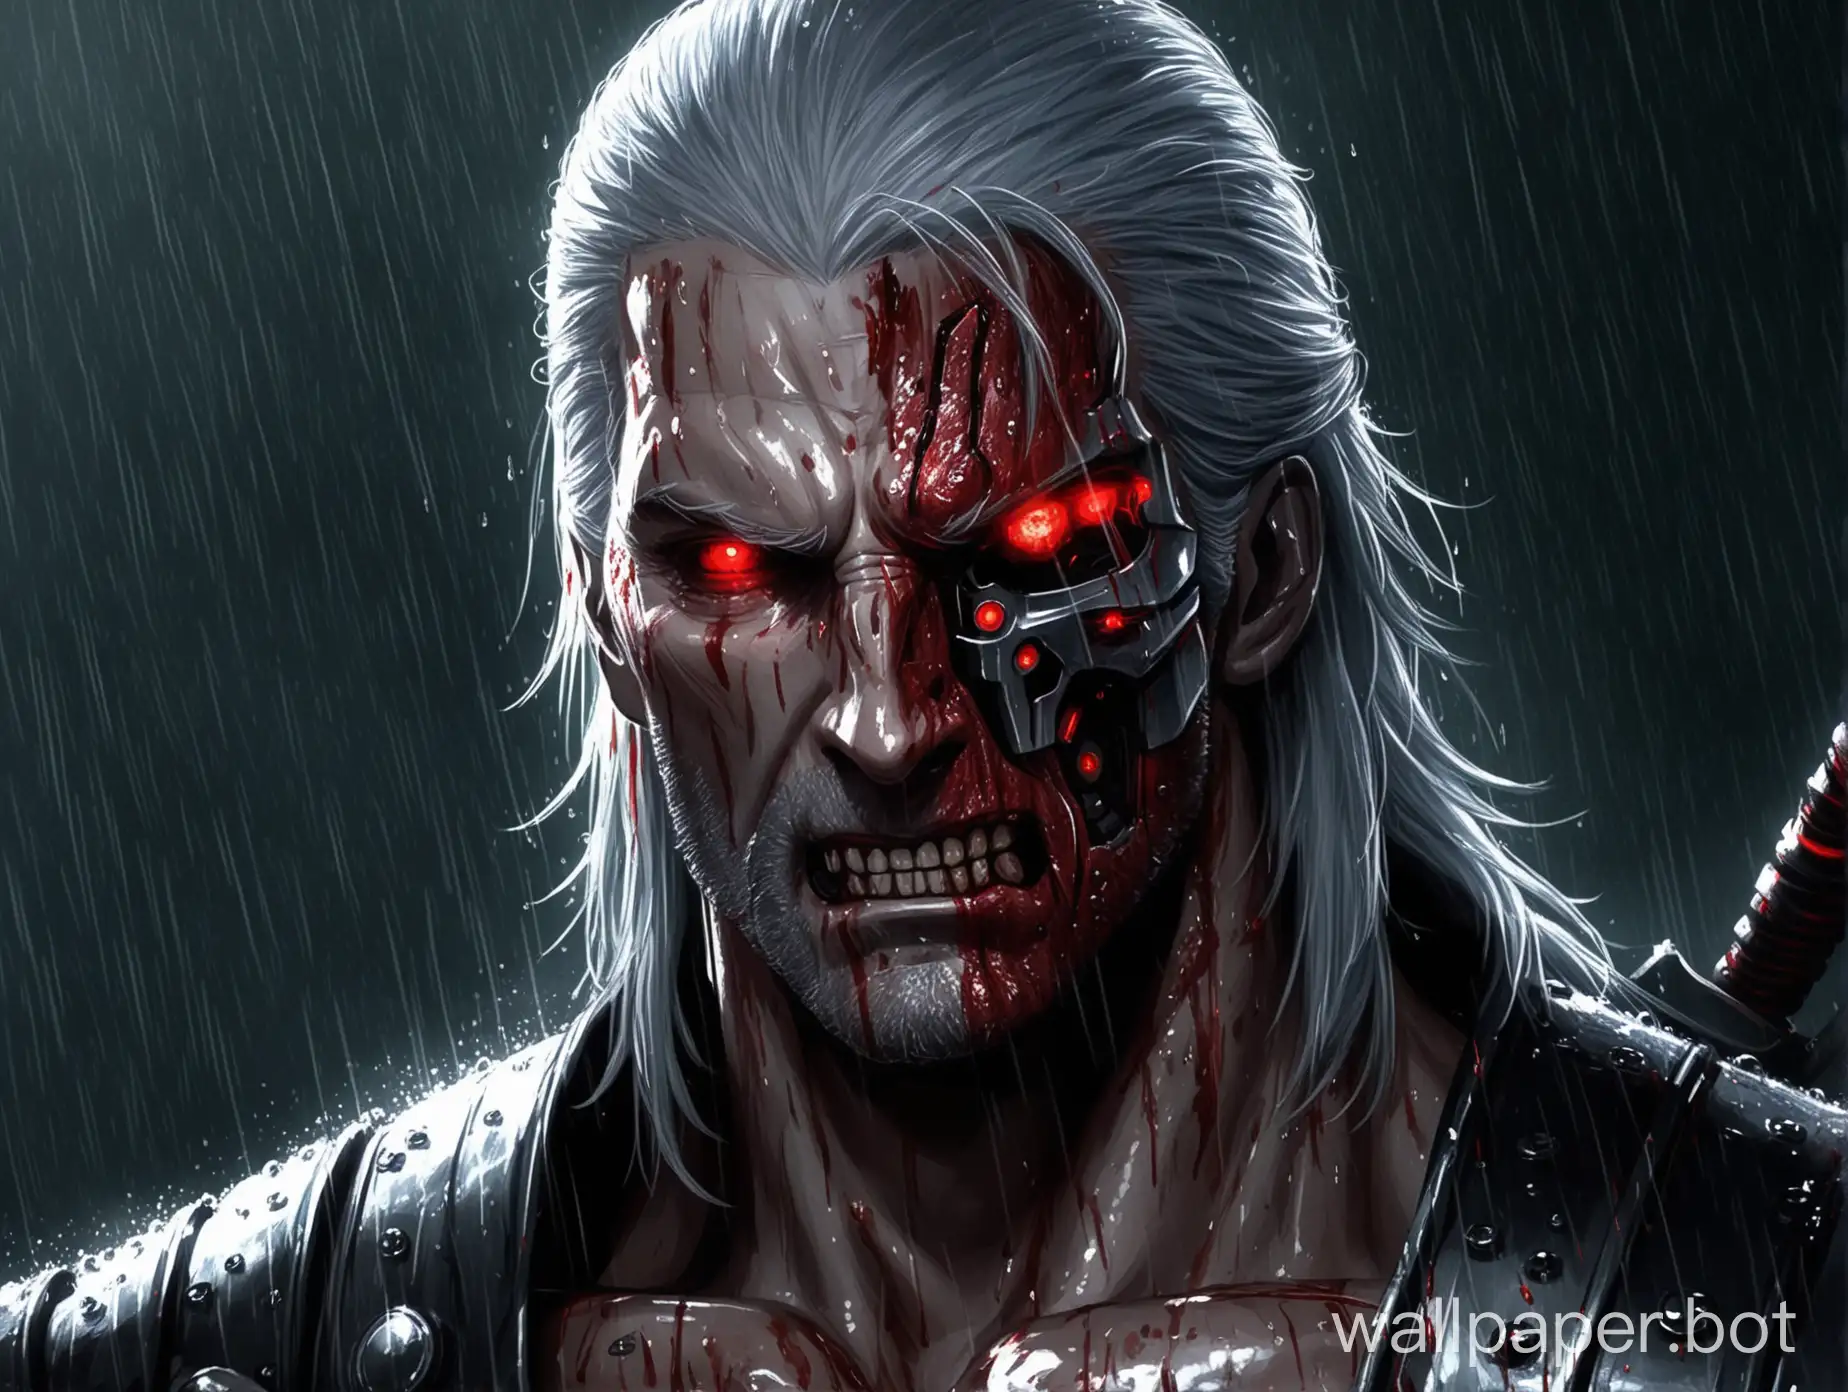 Geralt became half a terminator, half a human, a terrifying atmosphere, one eye with a crimson red pupil, the other eye black, rain falling on the face, blood flowing realistically, a frightening appearance.